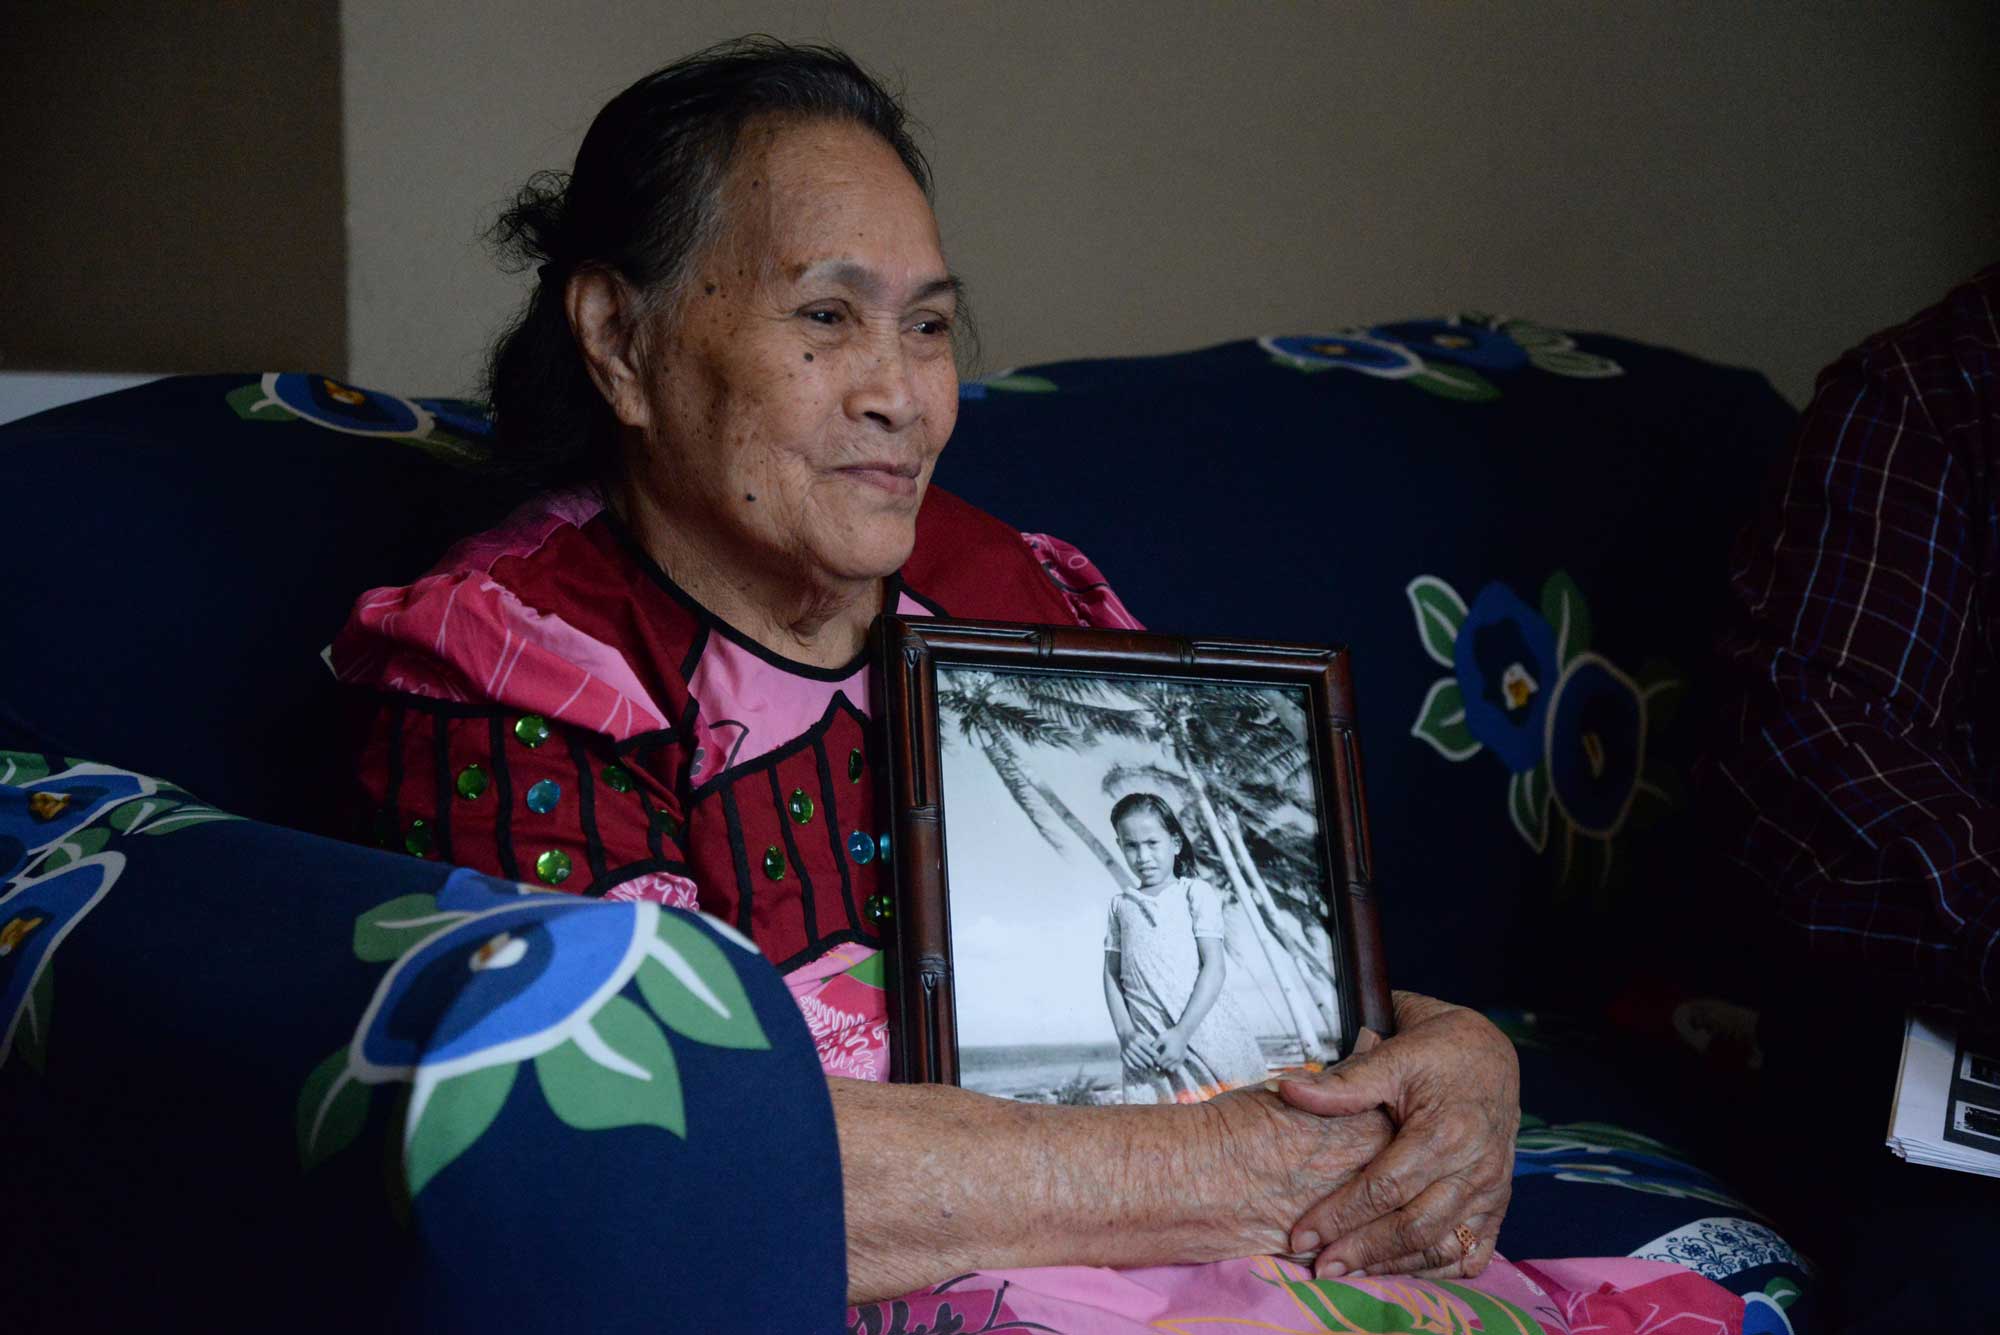 Sitting on a couch, Mojina Mote holds a framed photo of herself as a young girl.